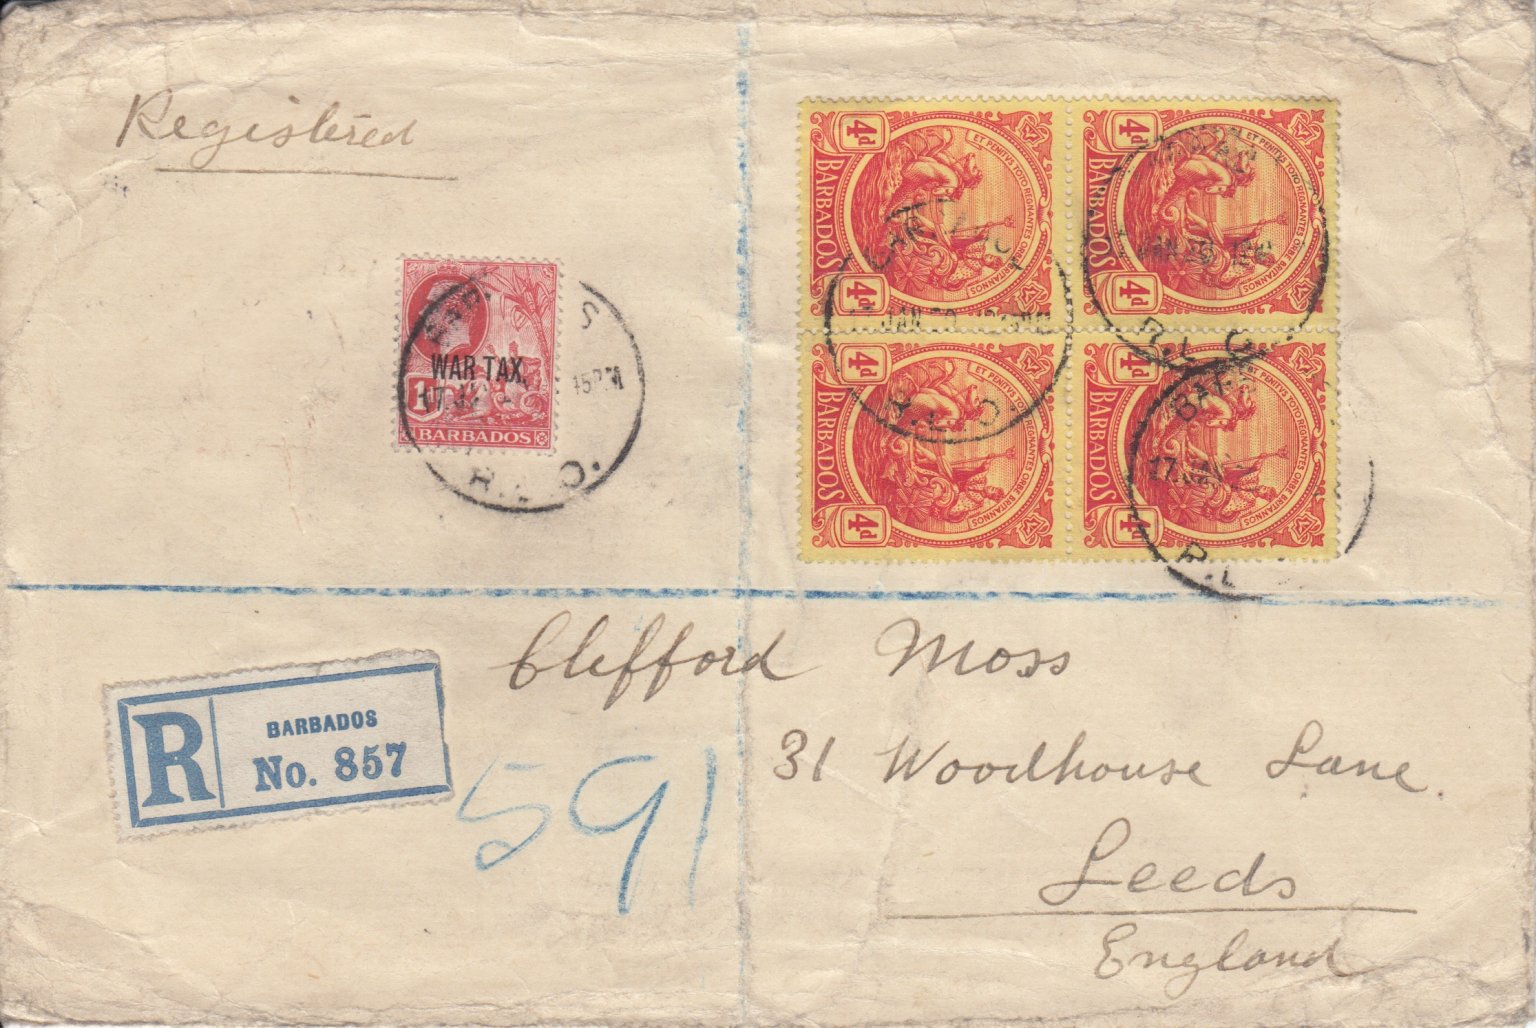 Barbados Stamps, covers, postmarks and cancellations